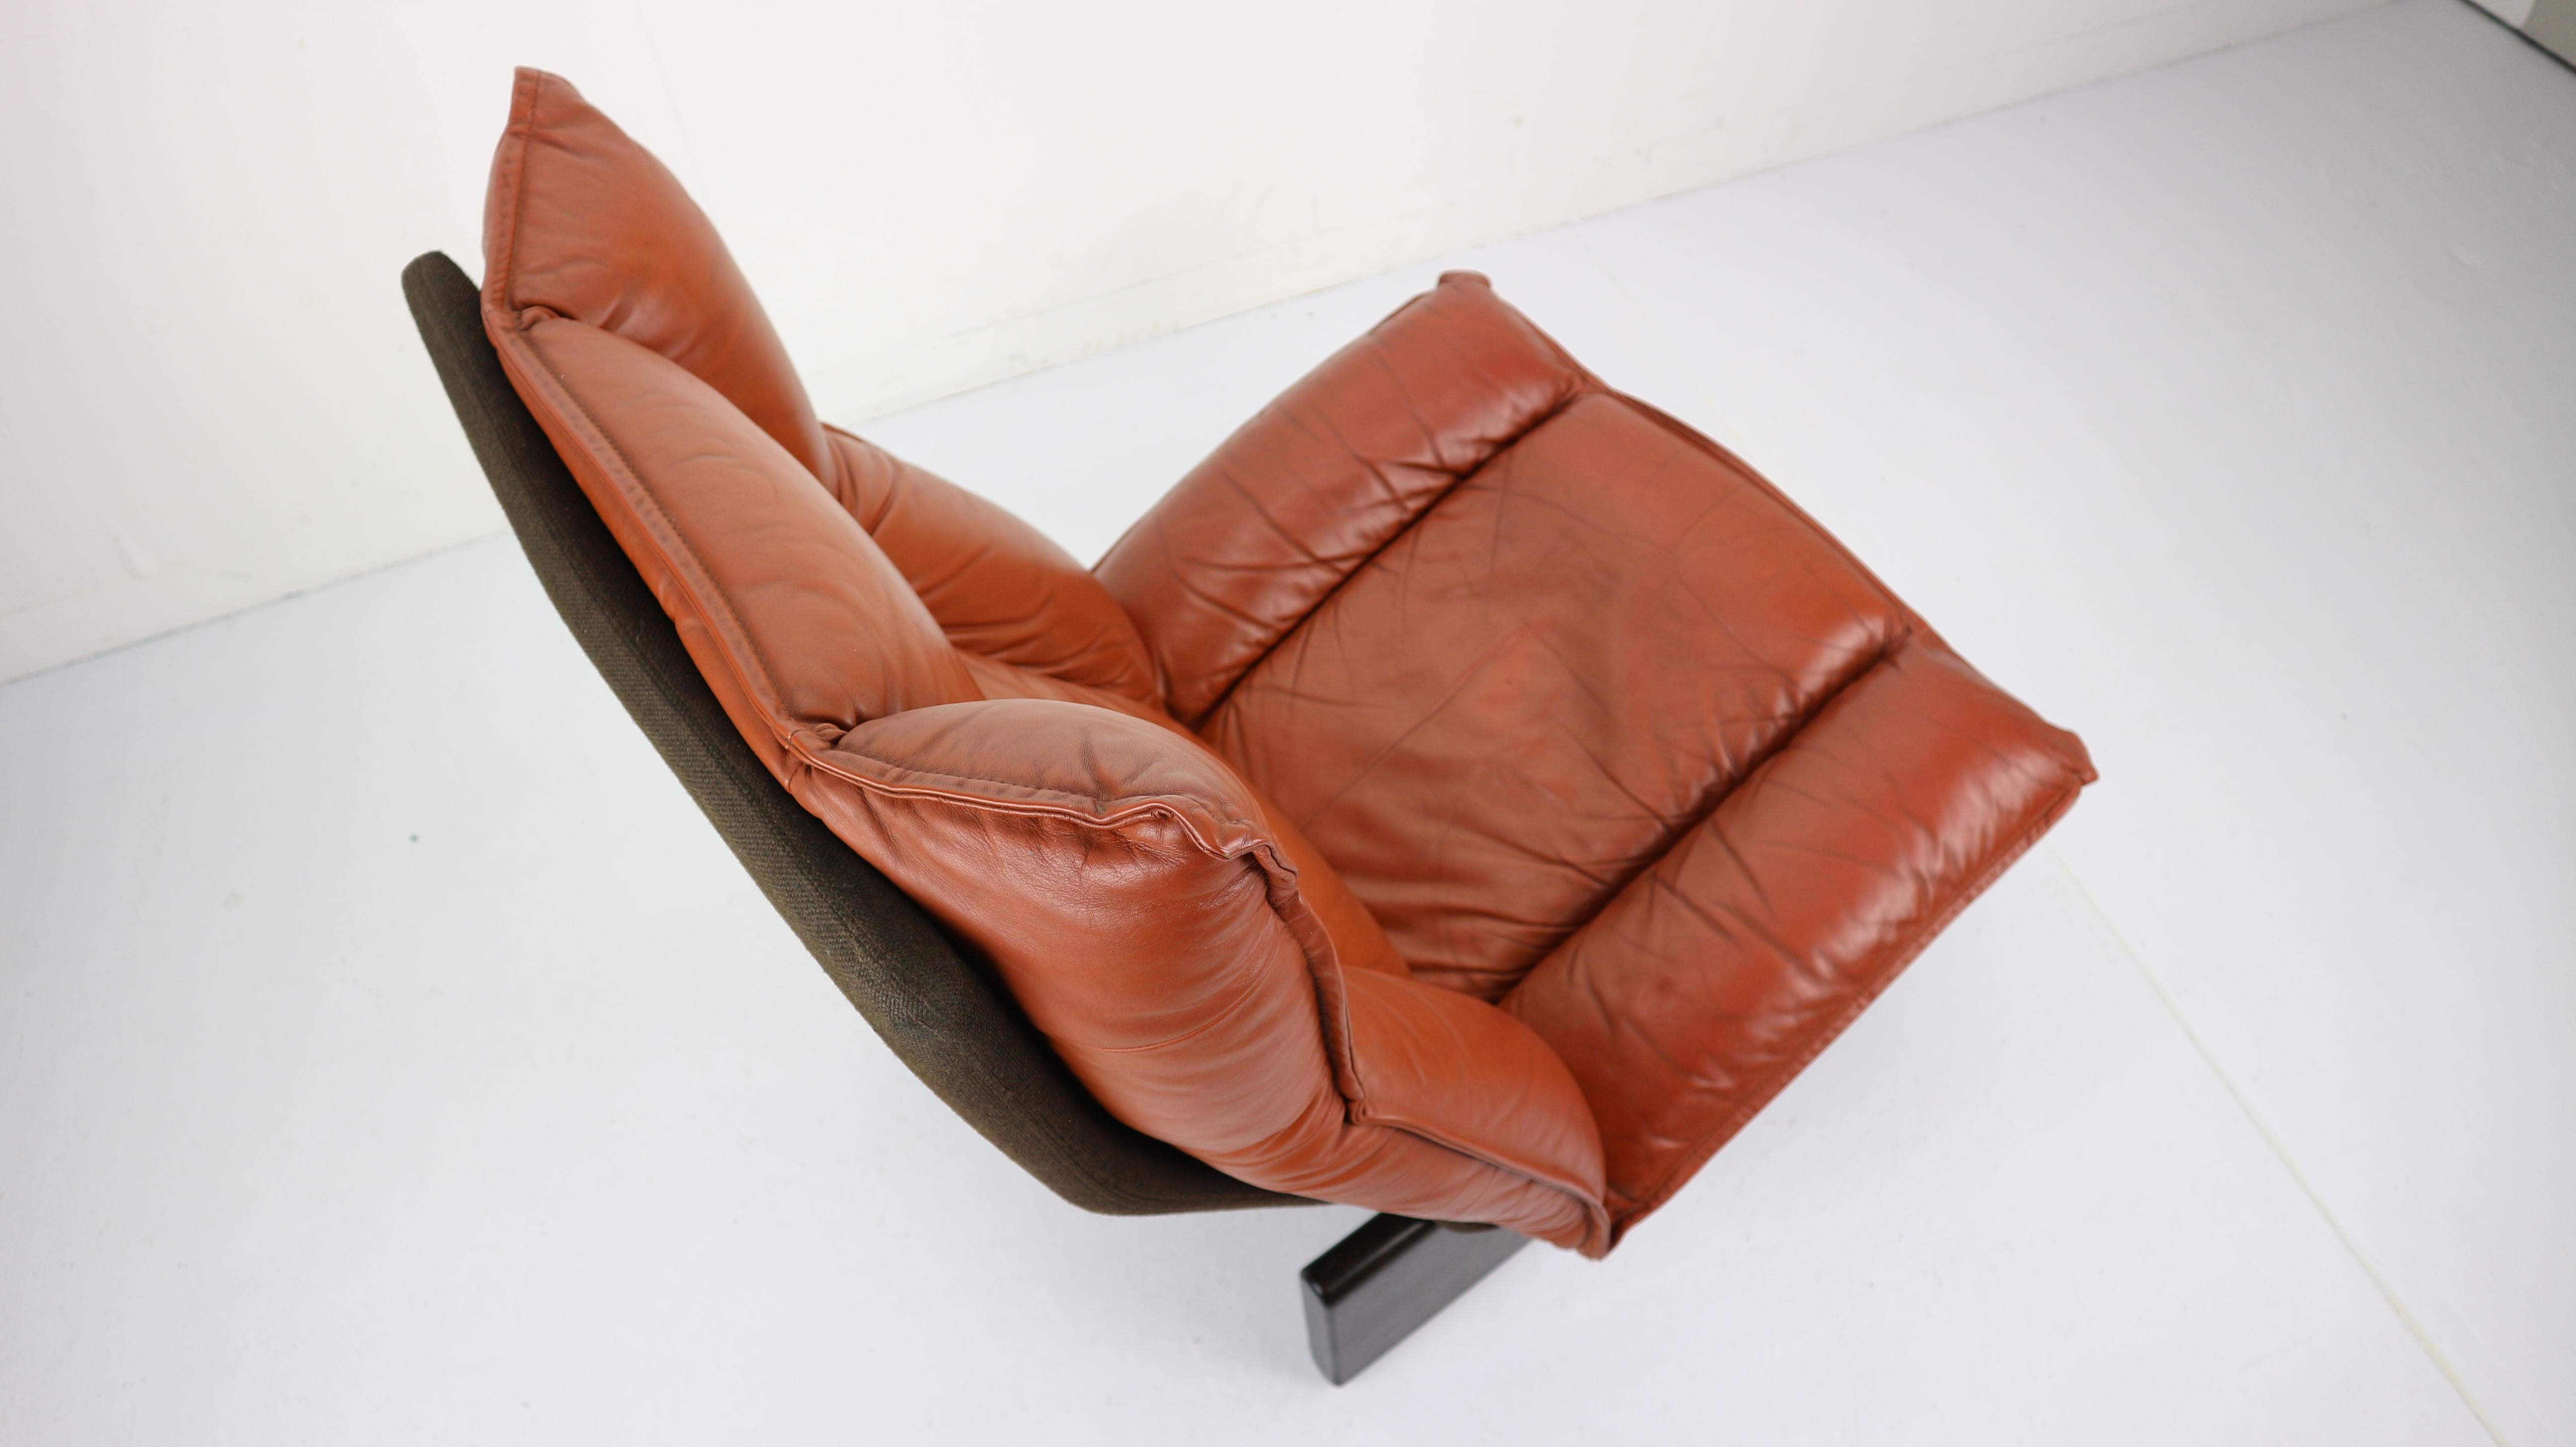 Cognac Leather and Wood Lounge Chair, Dutch Modern Design, 1970s 6